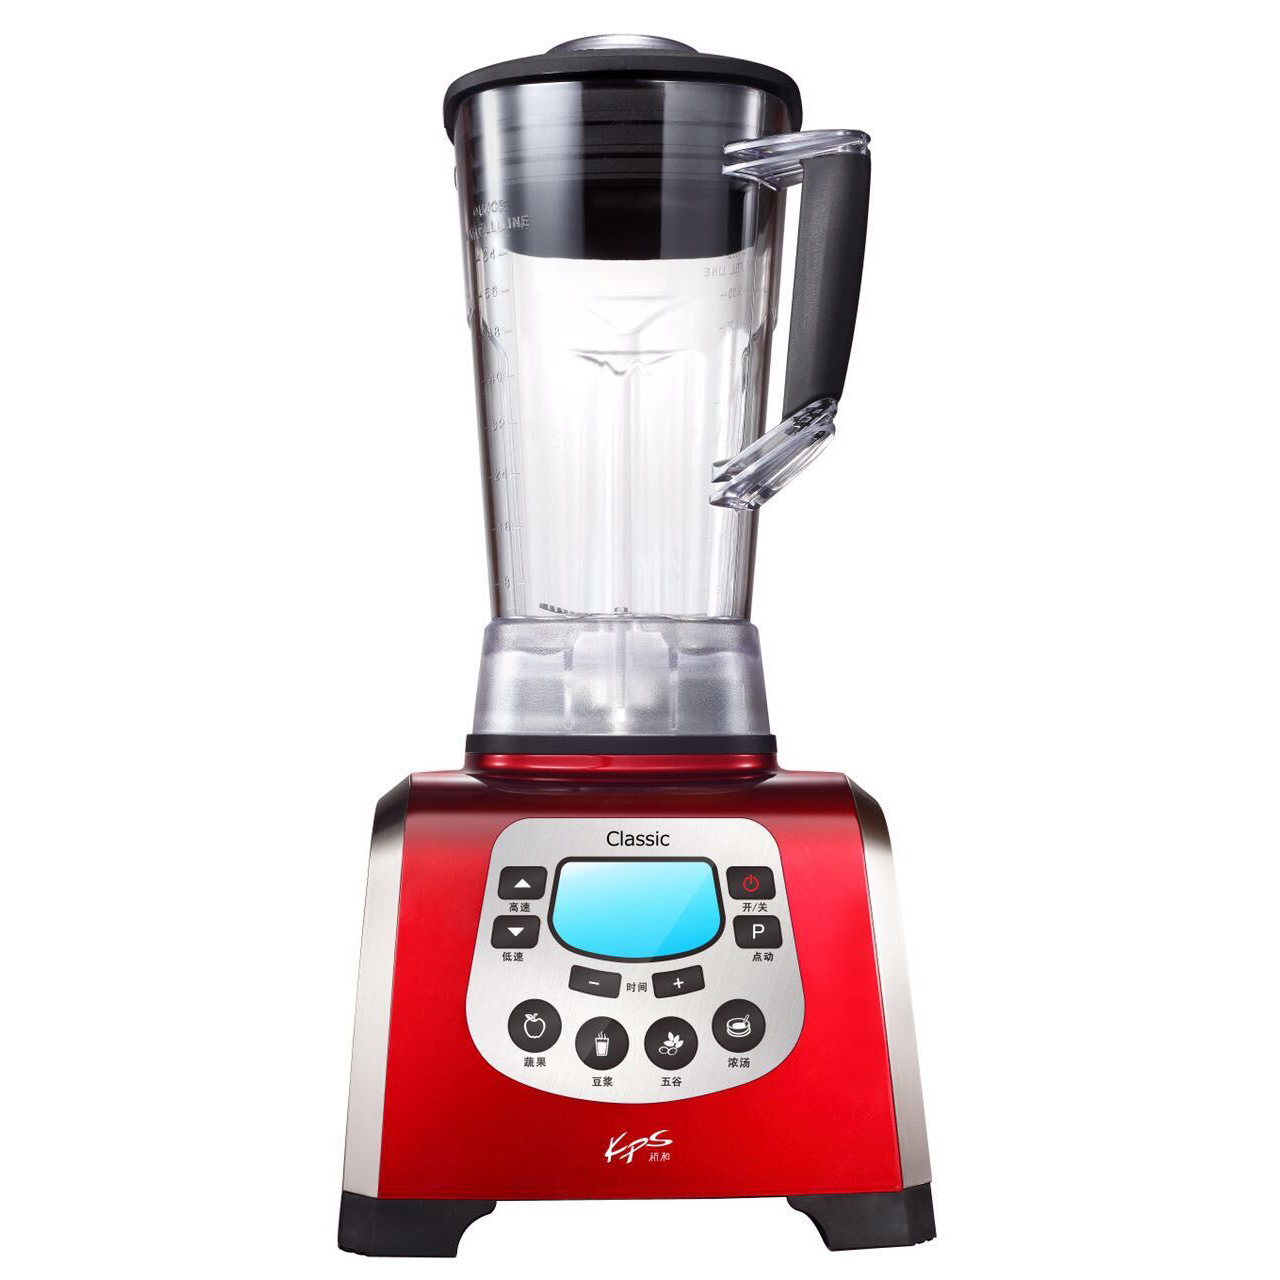 Press button with LCD Pro Blender